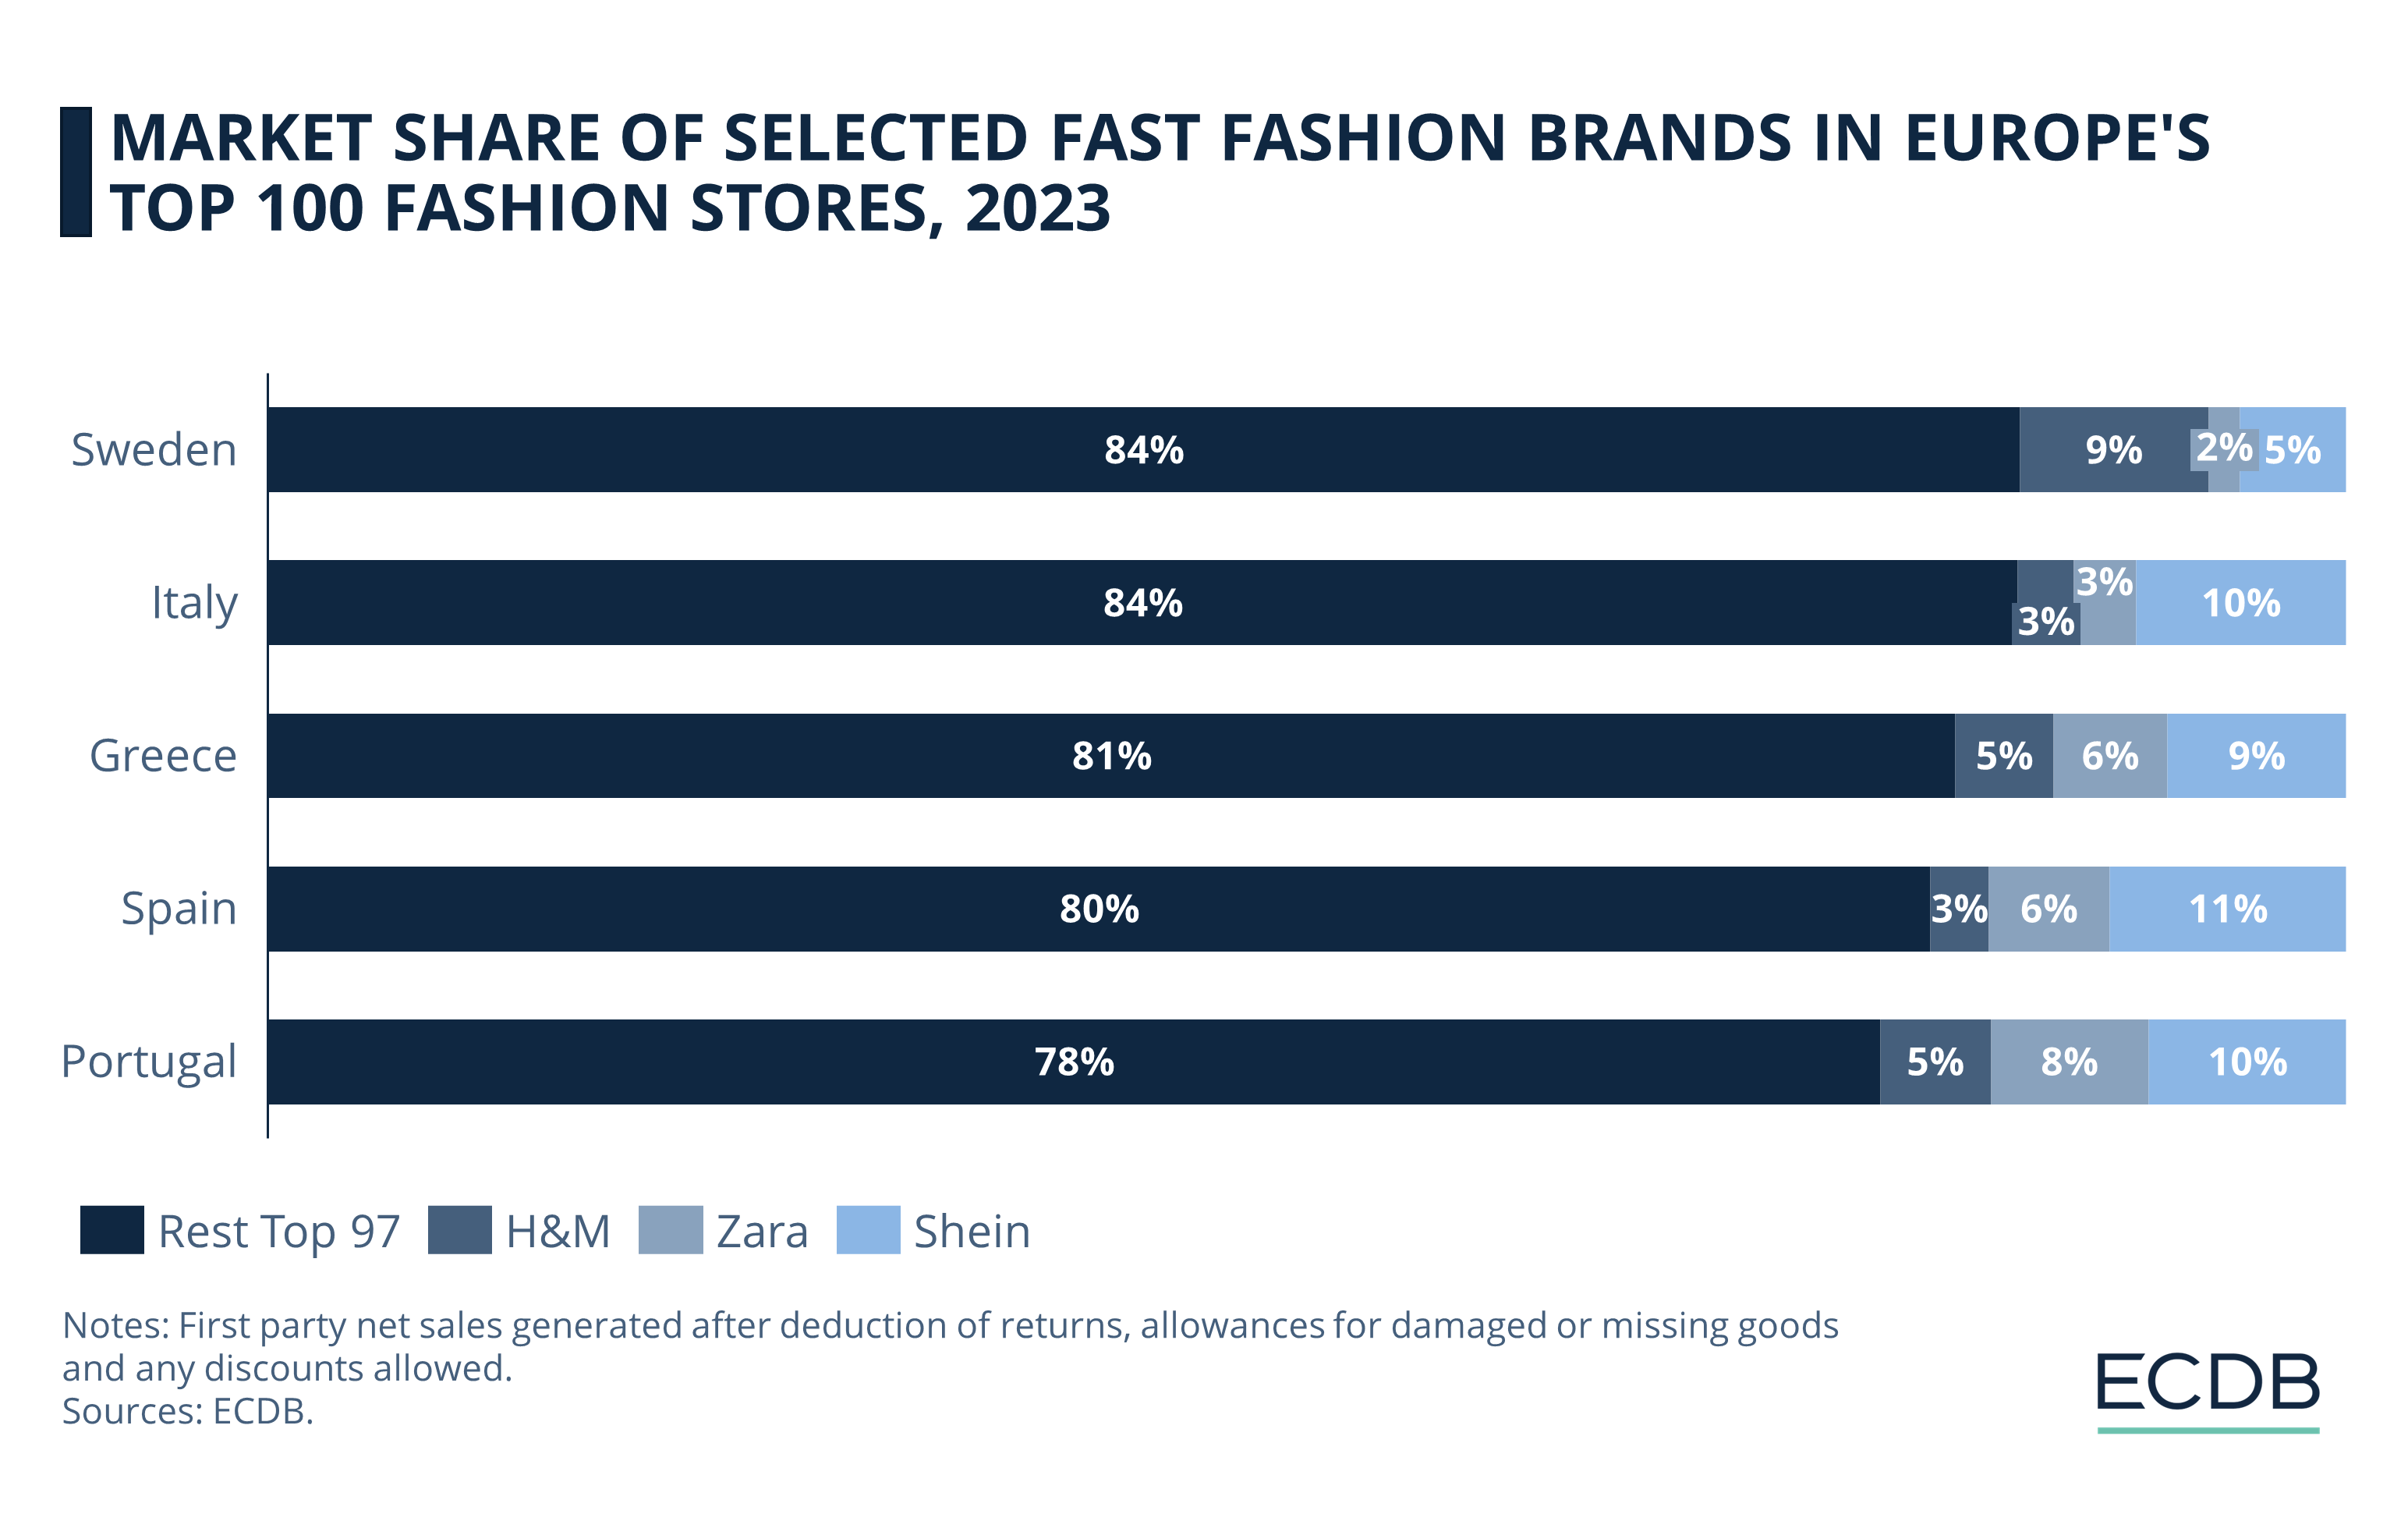 Market Share of Selected Fast Fashion Brands in Europe's Top 100 Fashion Stores, 2022